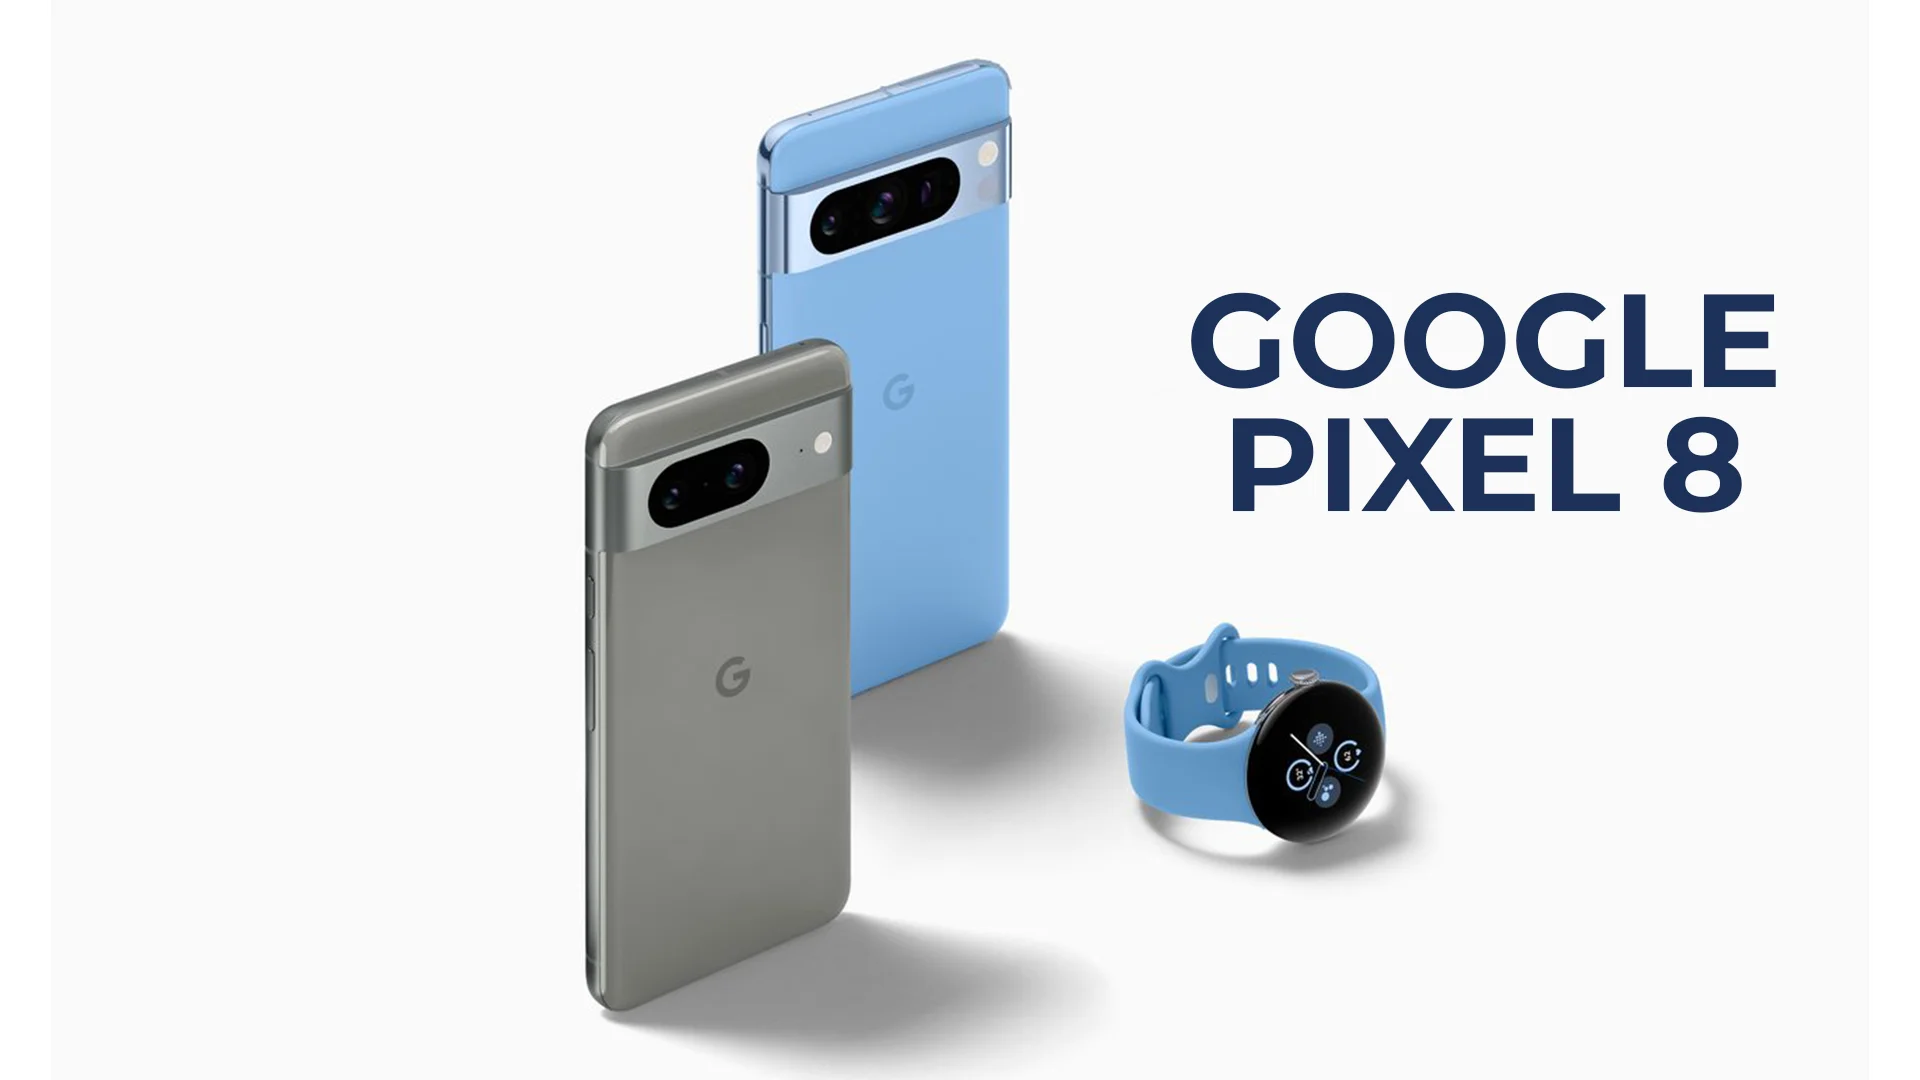 Google Pixel 8: The Future Of Android Smartphones